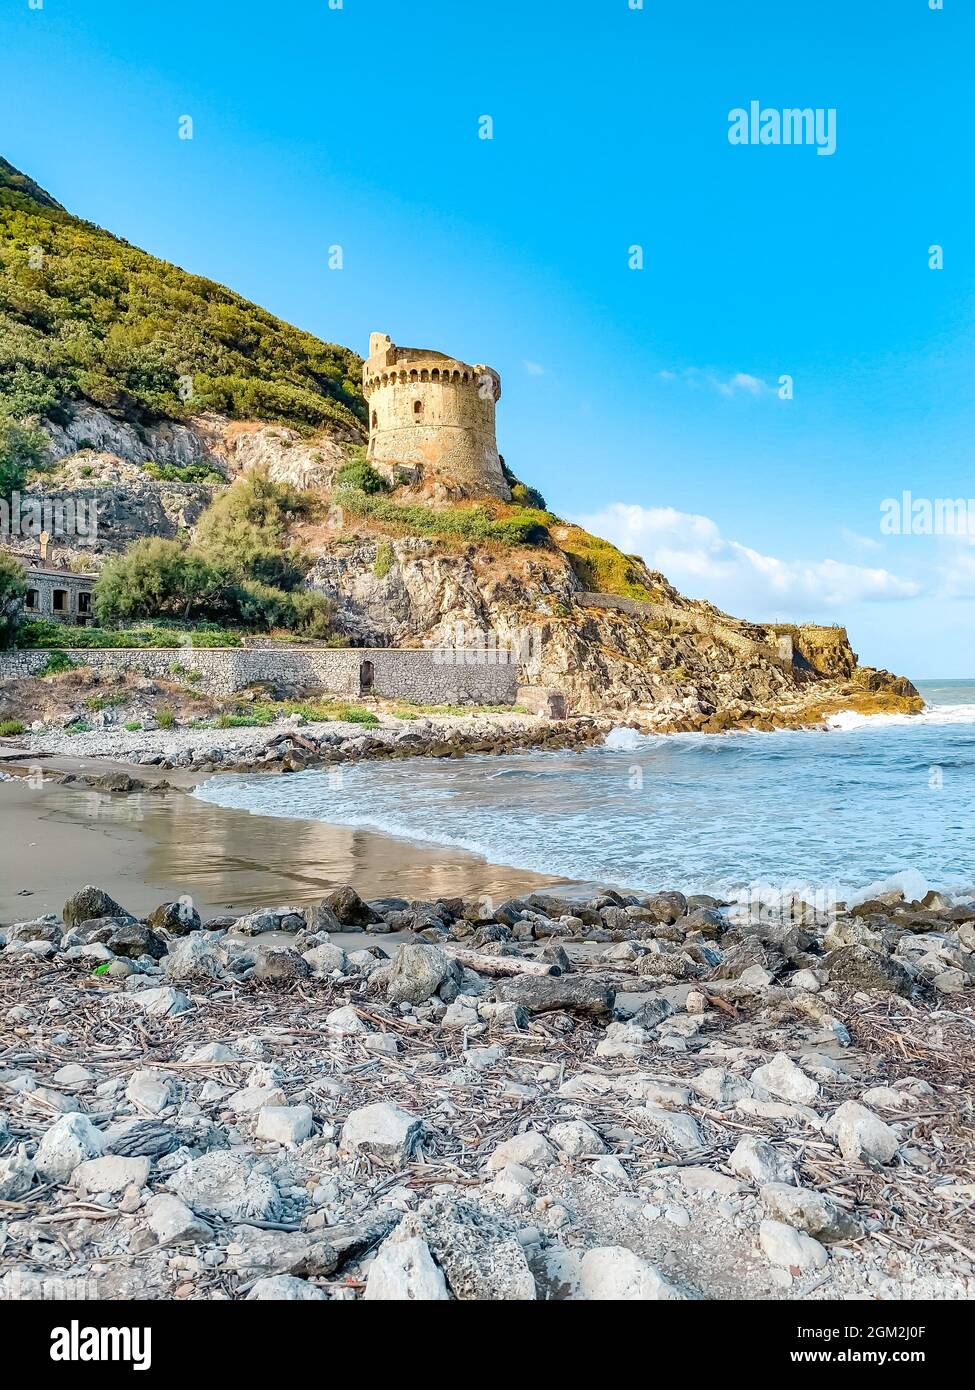 Ancient roman defense tower Torre Paola on a hill near the Mediterranean Sea in the Circeo National Park. Beautiful coast of Lungomare di Sabaudia Stock Photo